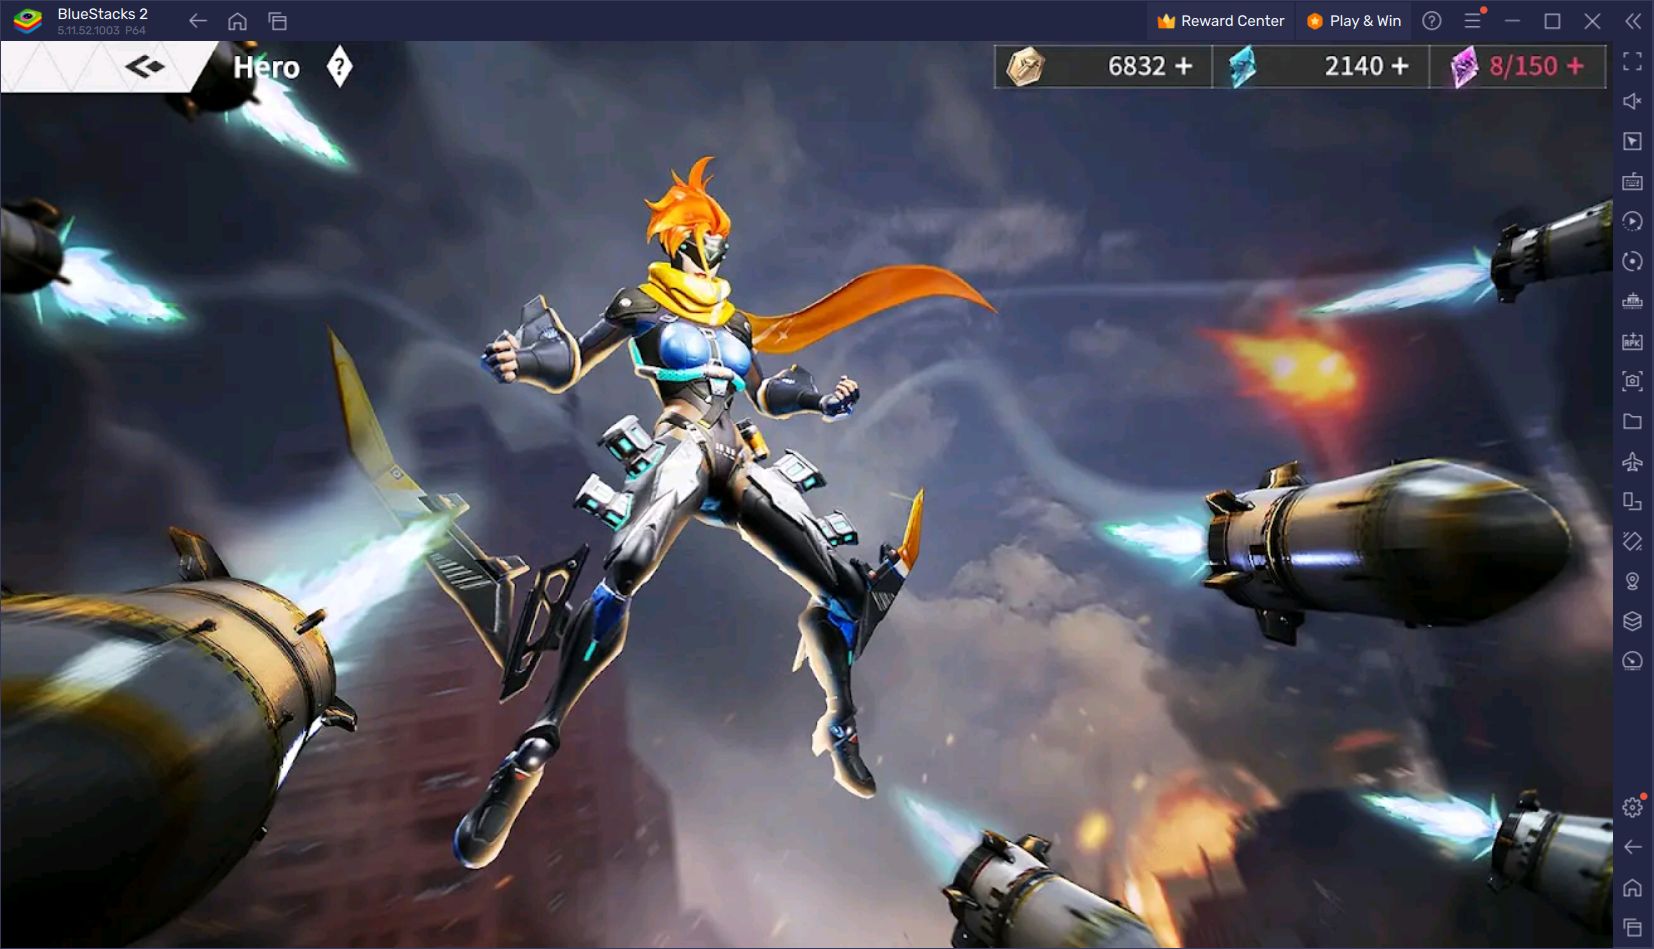 Use BlueStacks to Play Rise of Cyber on PC